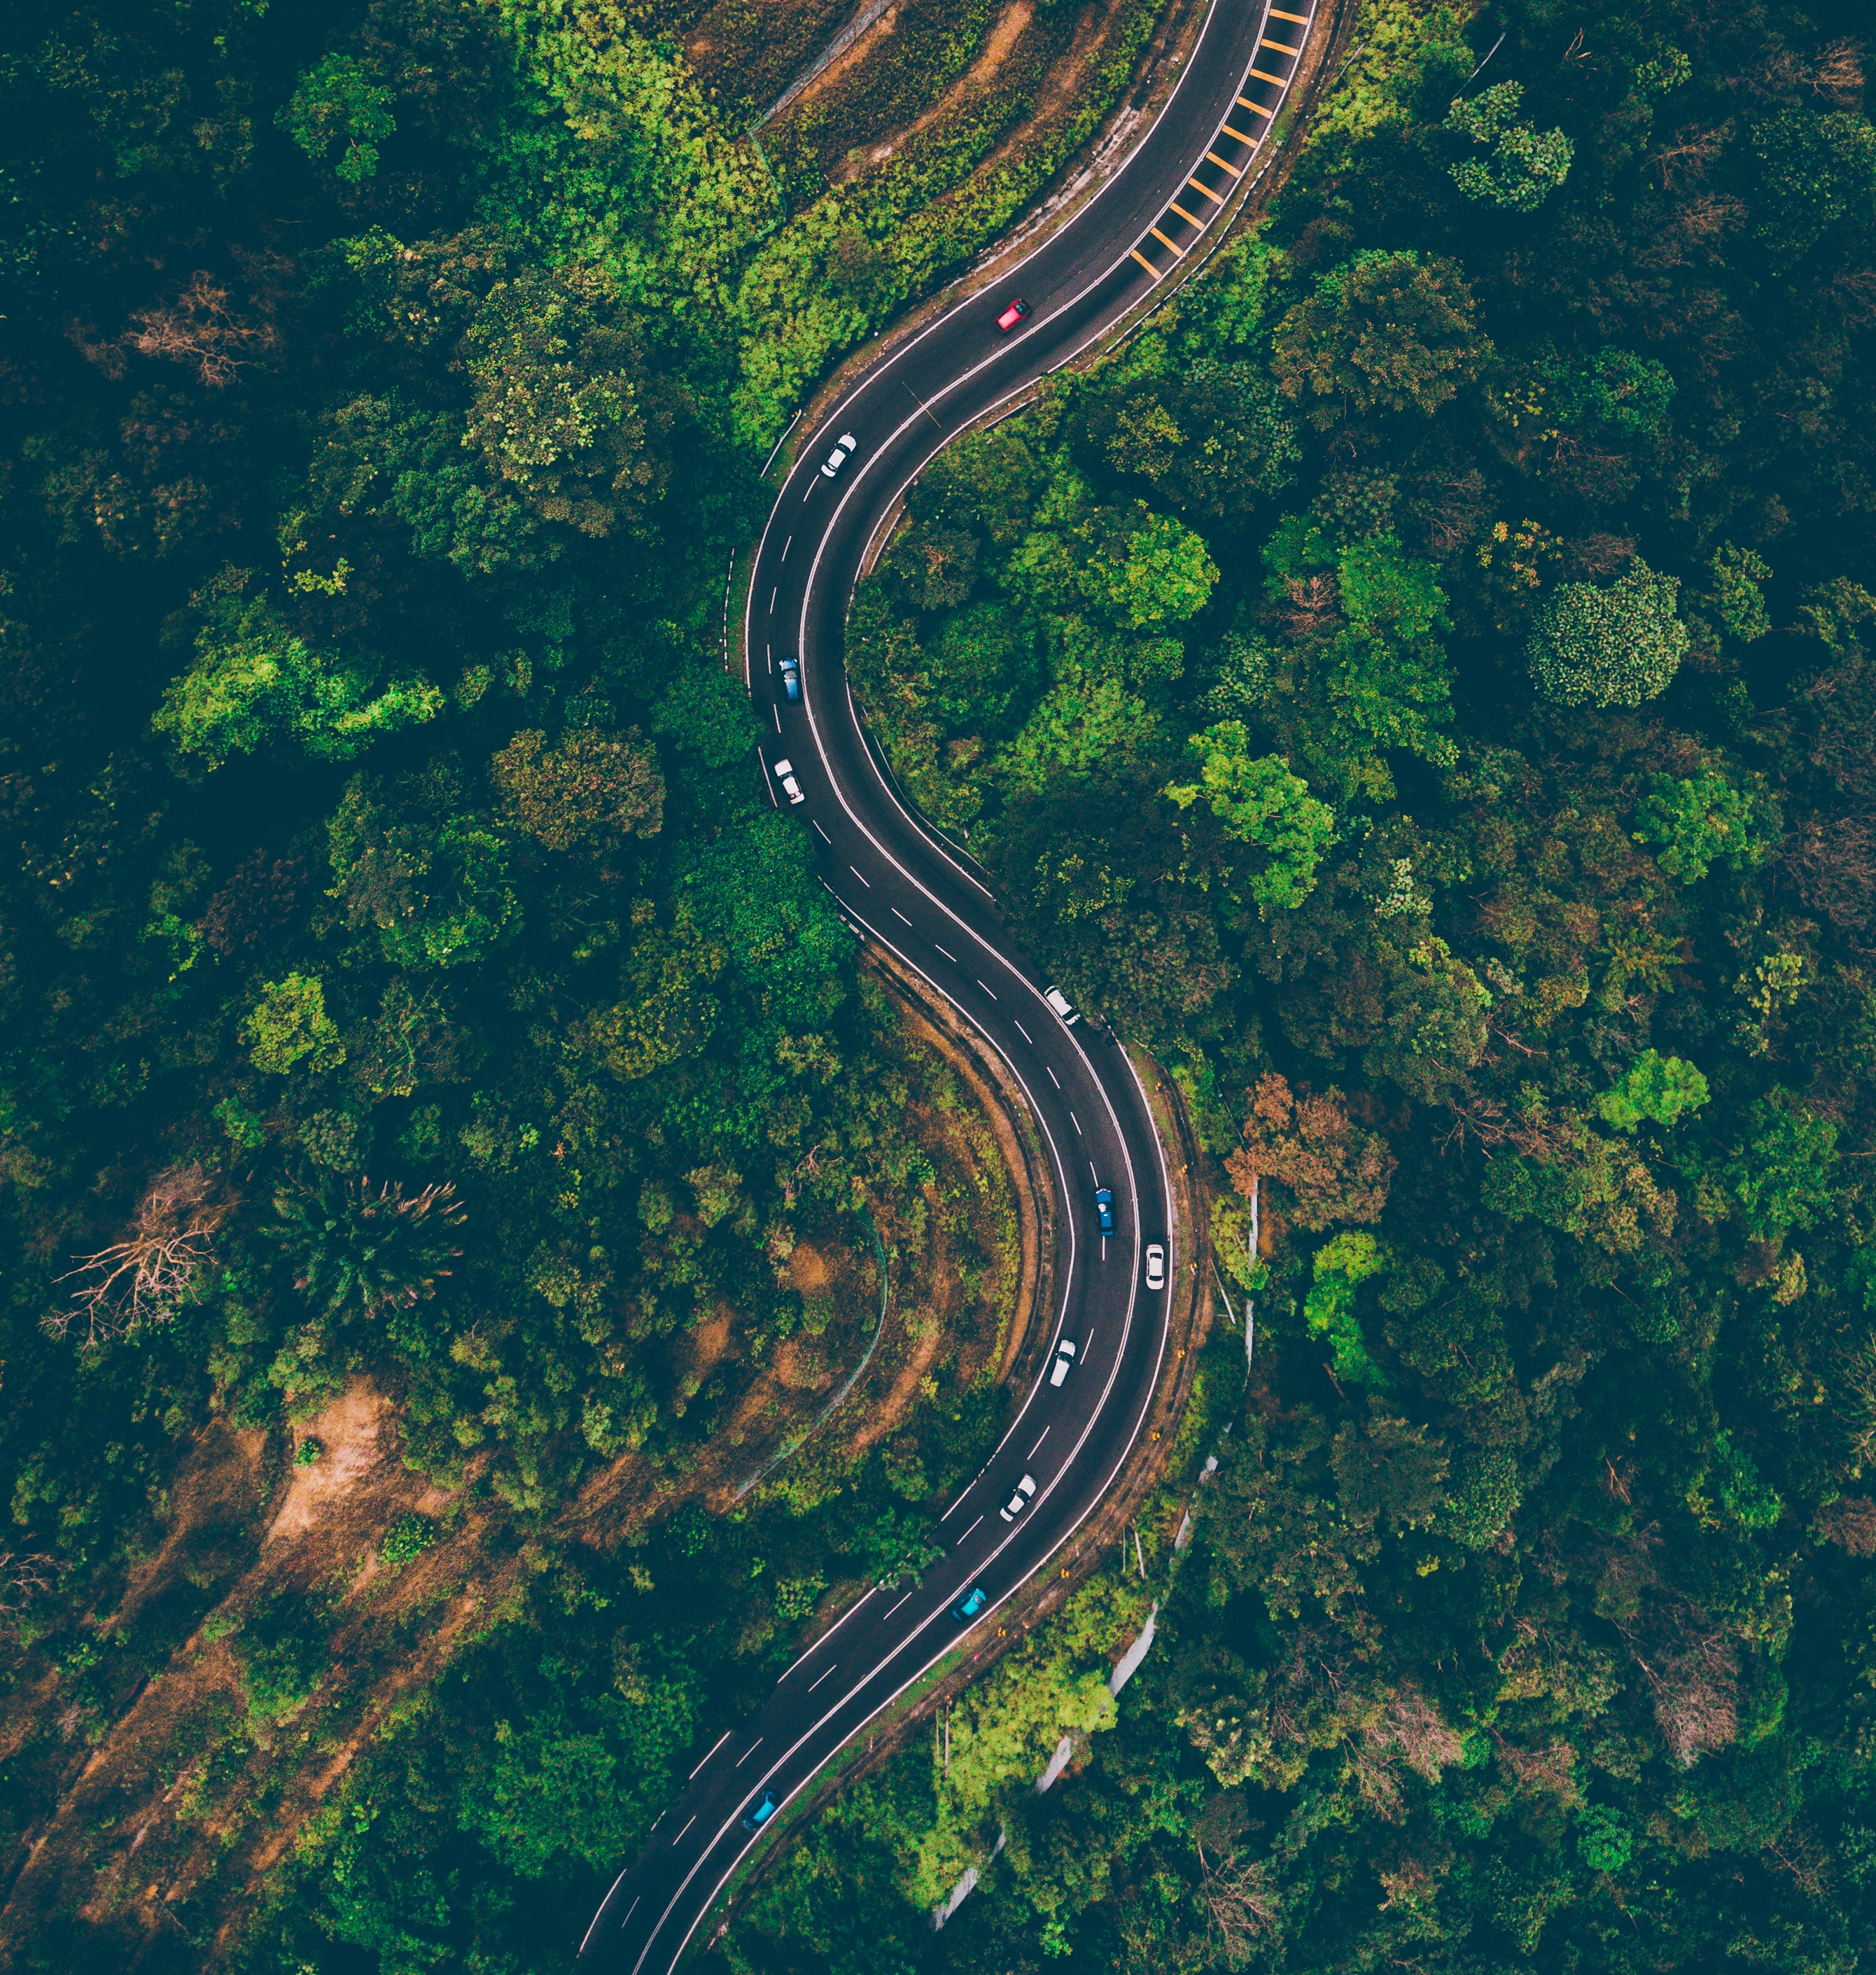 sinuous, road, malaysia, view from above, nature, trees, winding, batang kali